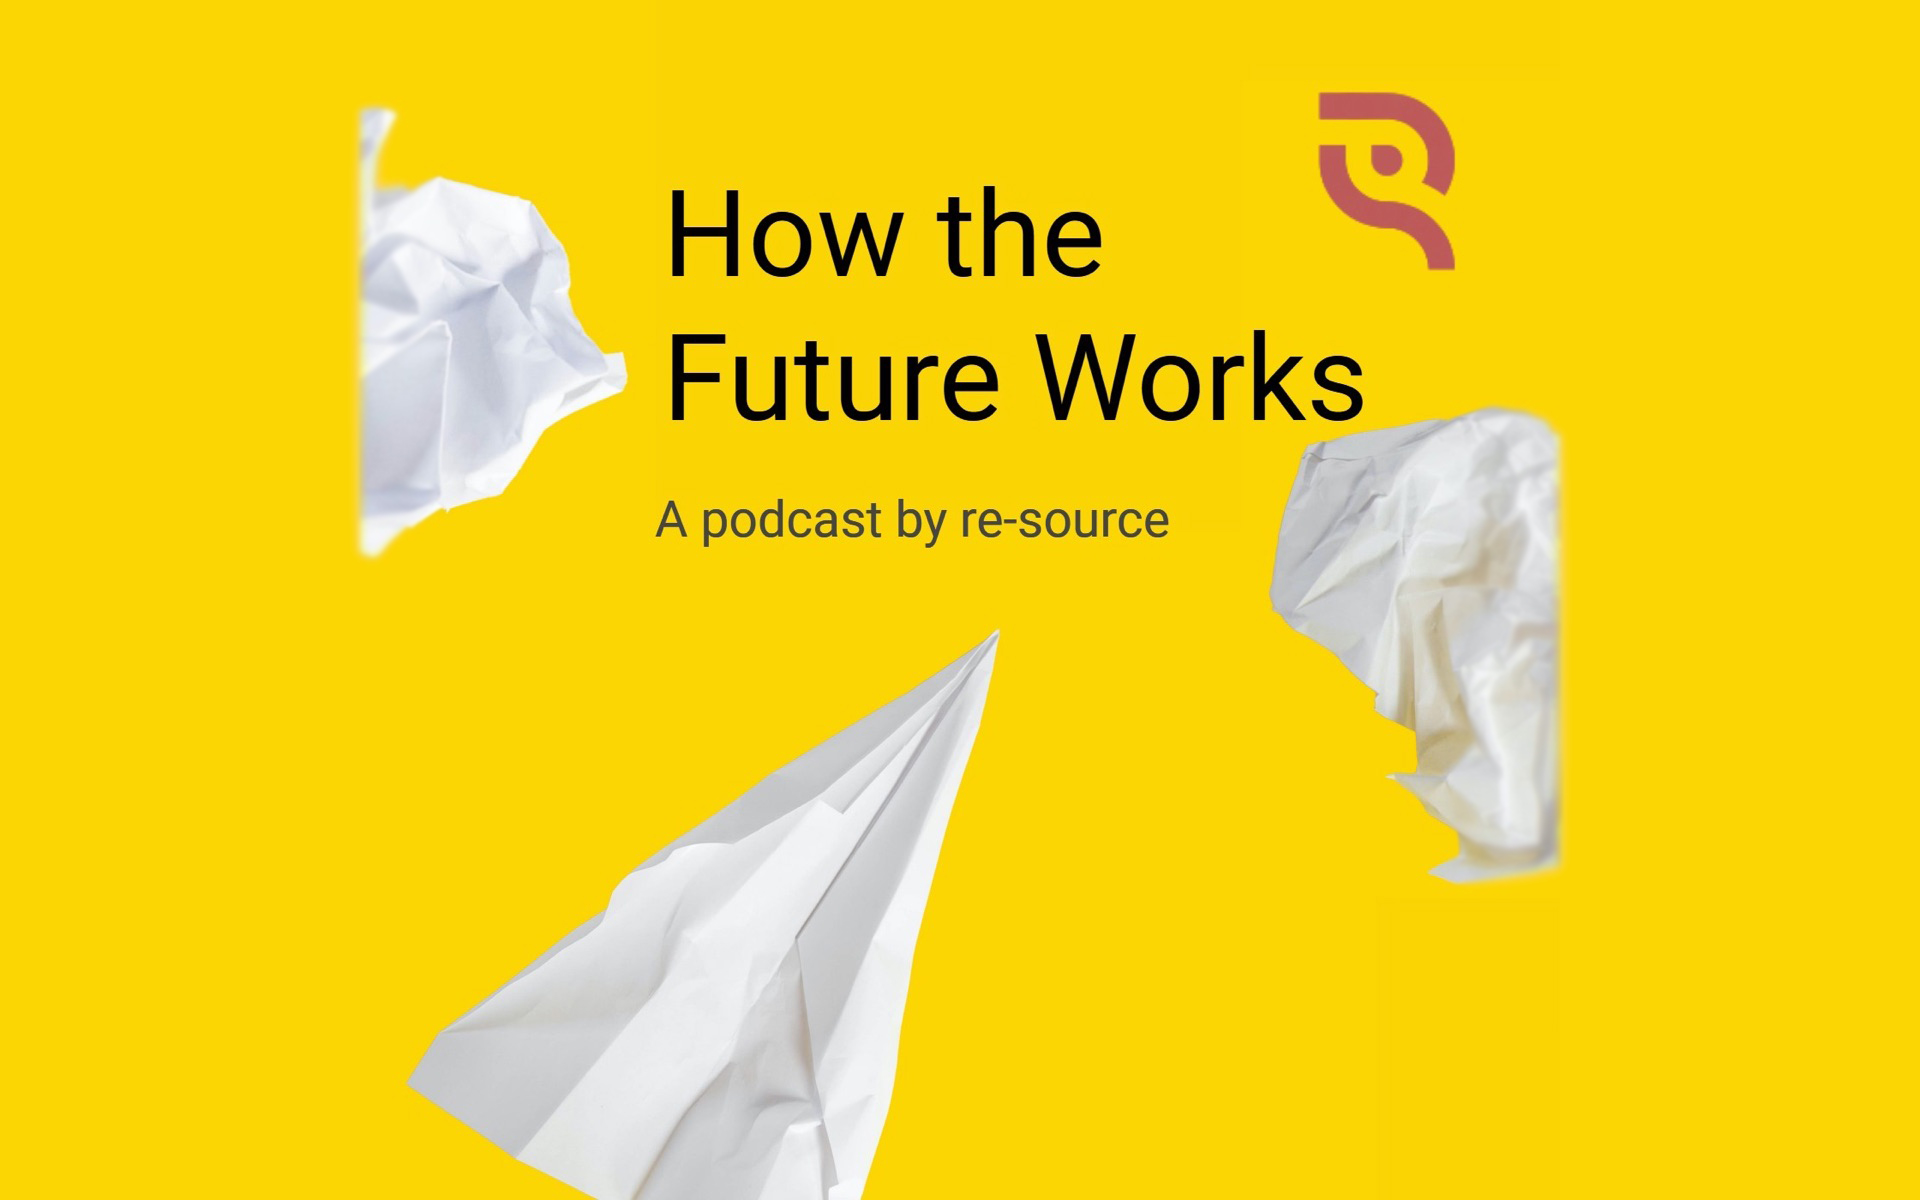 How the Future Works Podcast